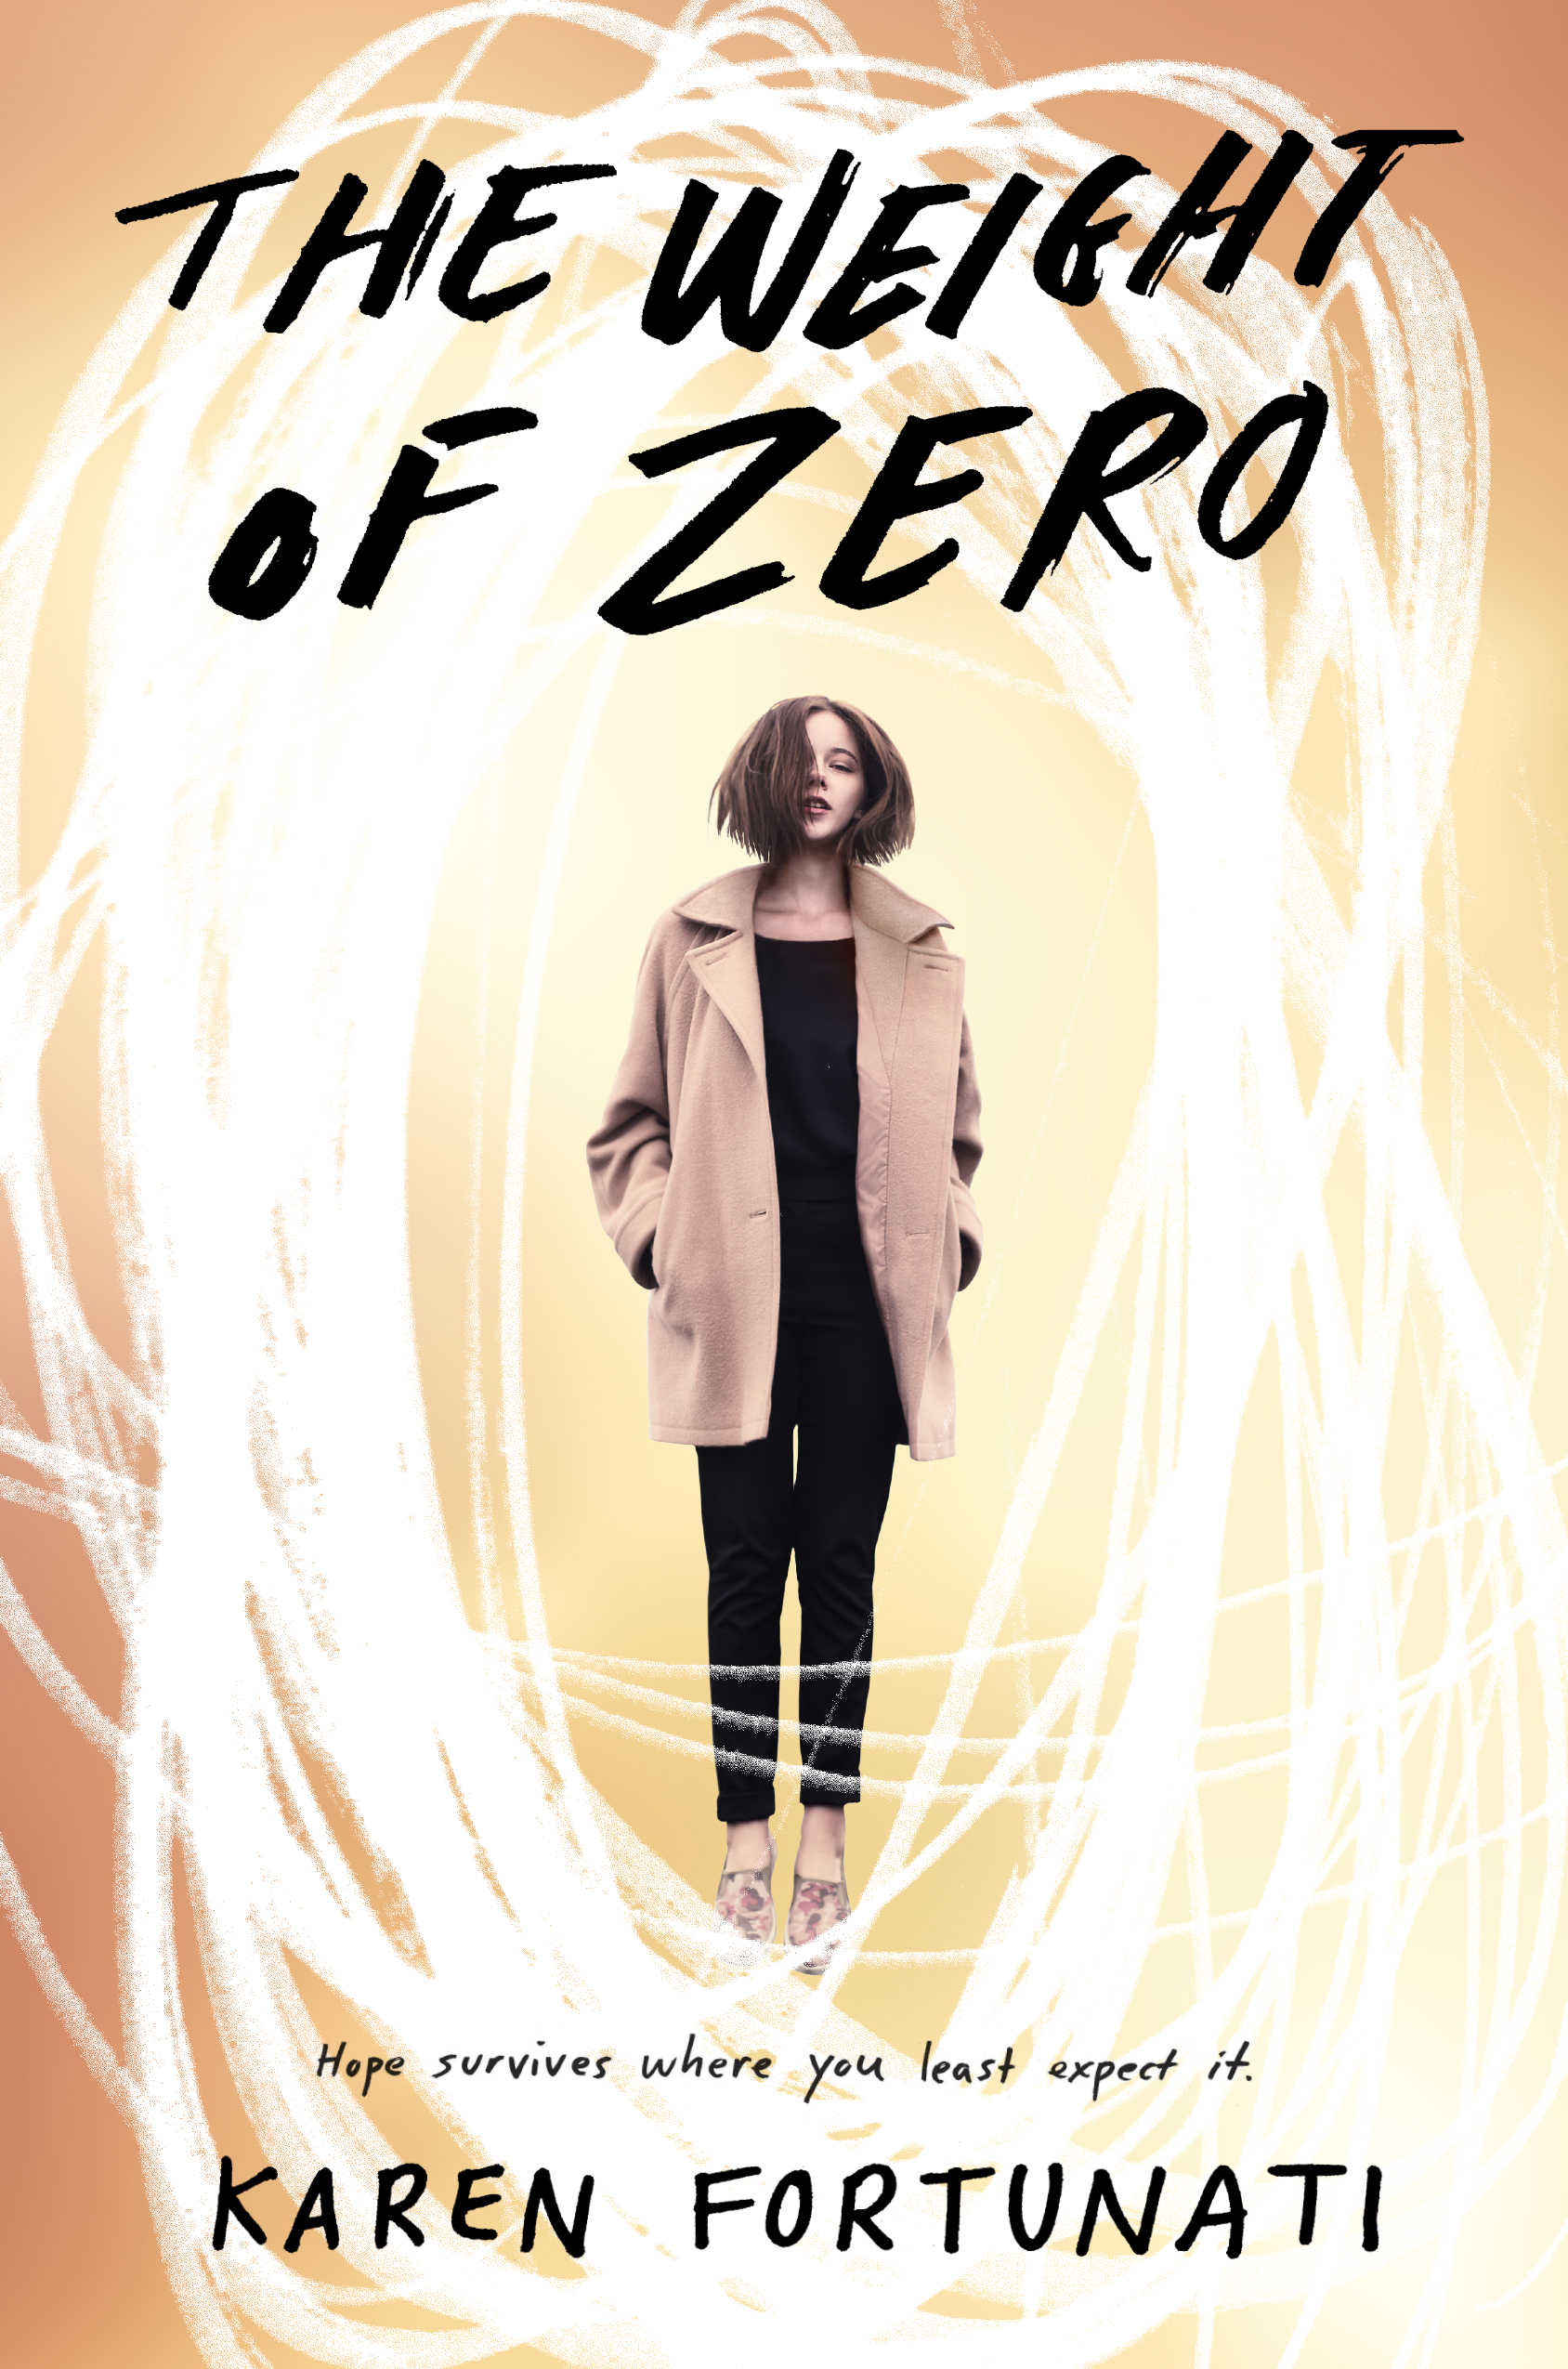 THE WEIGHT OF ZERO out October, 2016